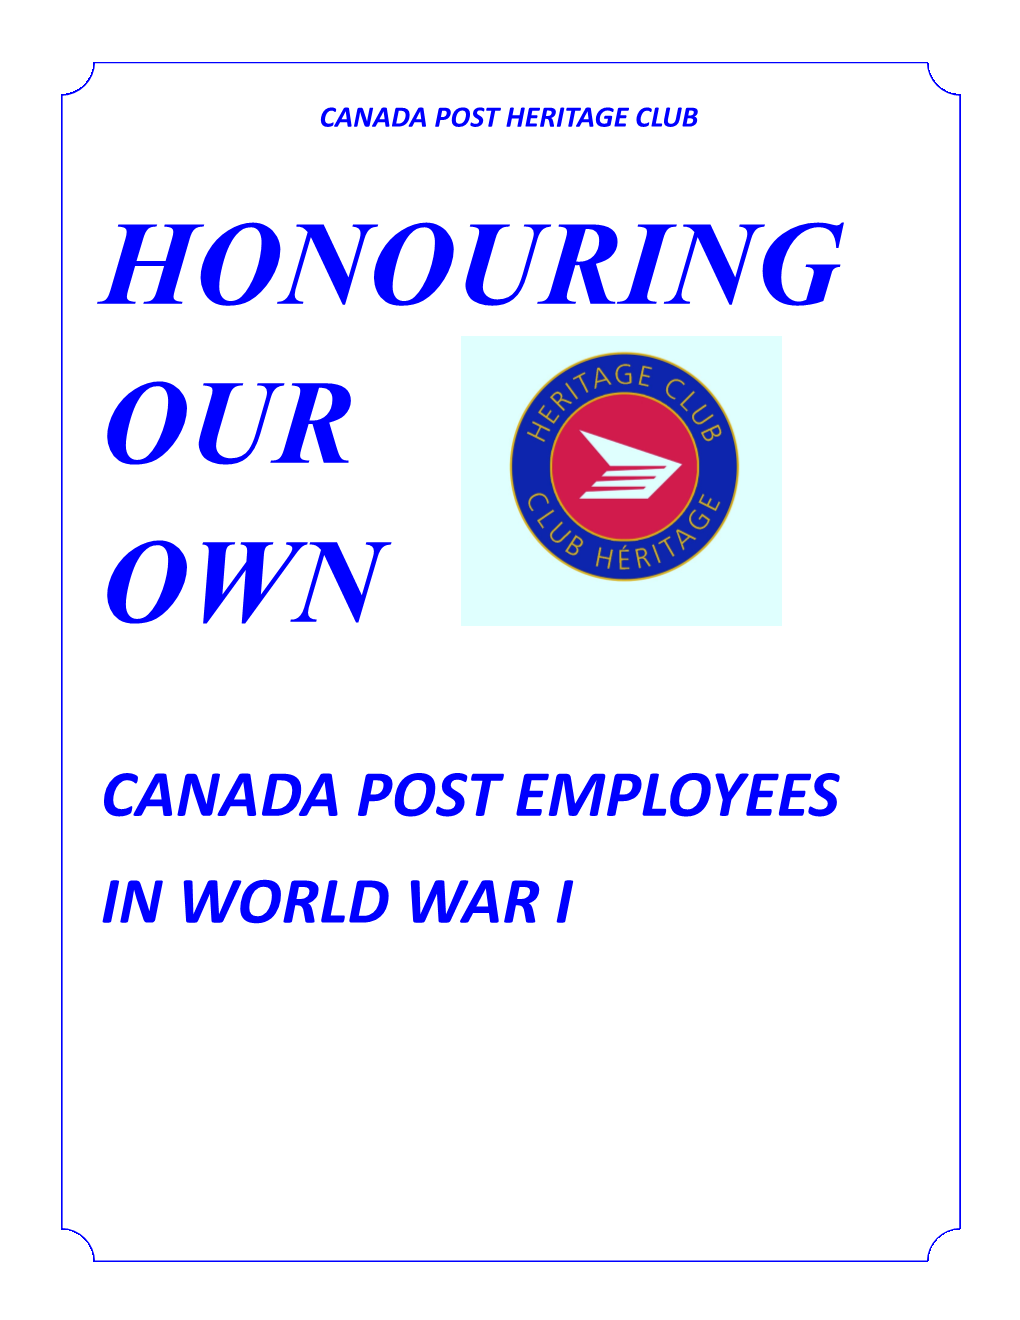 Canada Post Employees in World War I